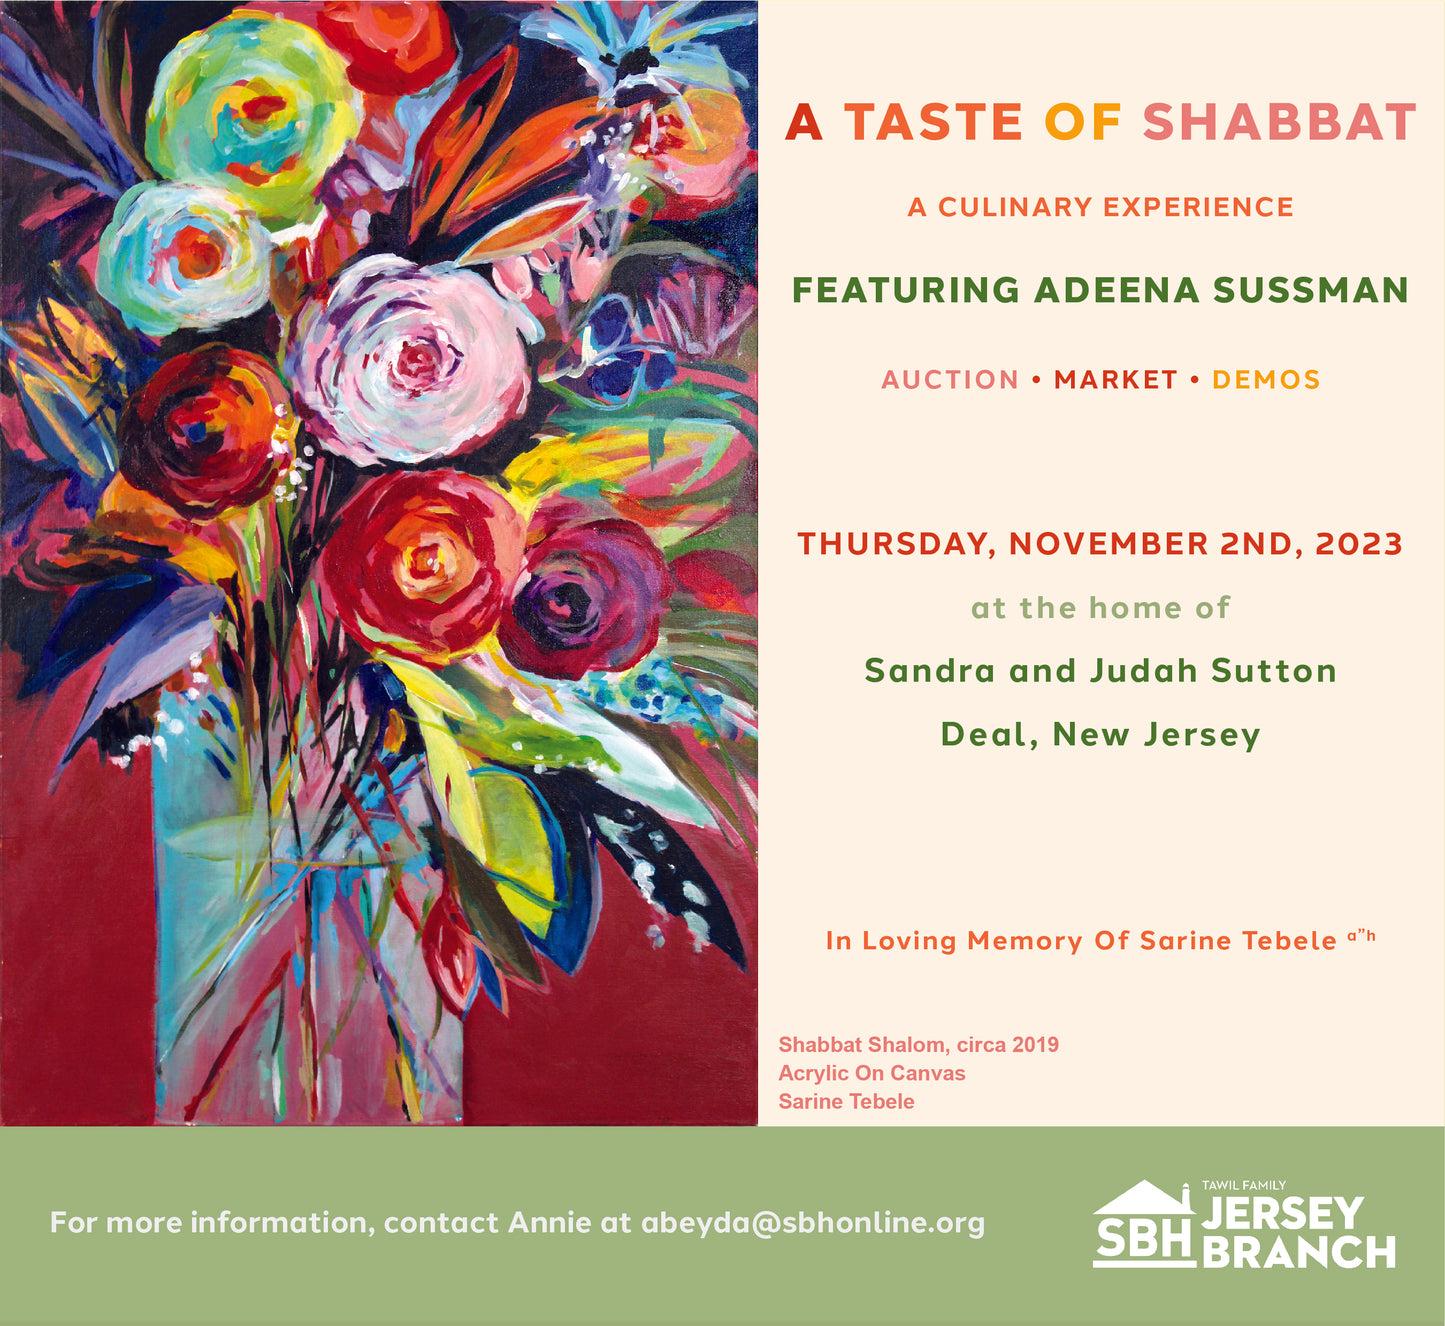 Shabbat Cookbook Signed by Adeena Sussman + Two Spices Package